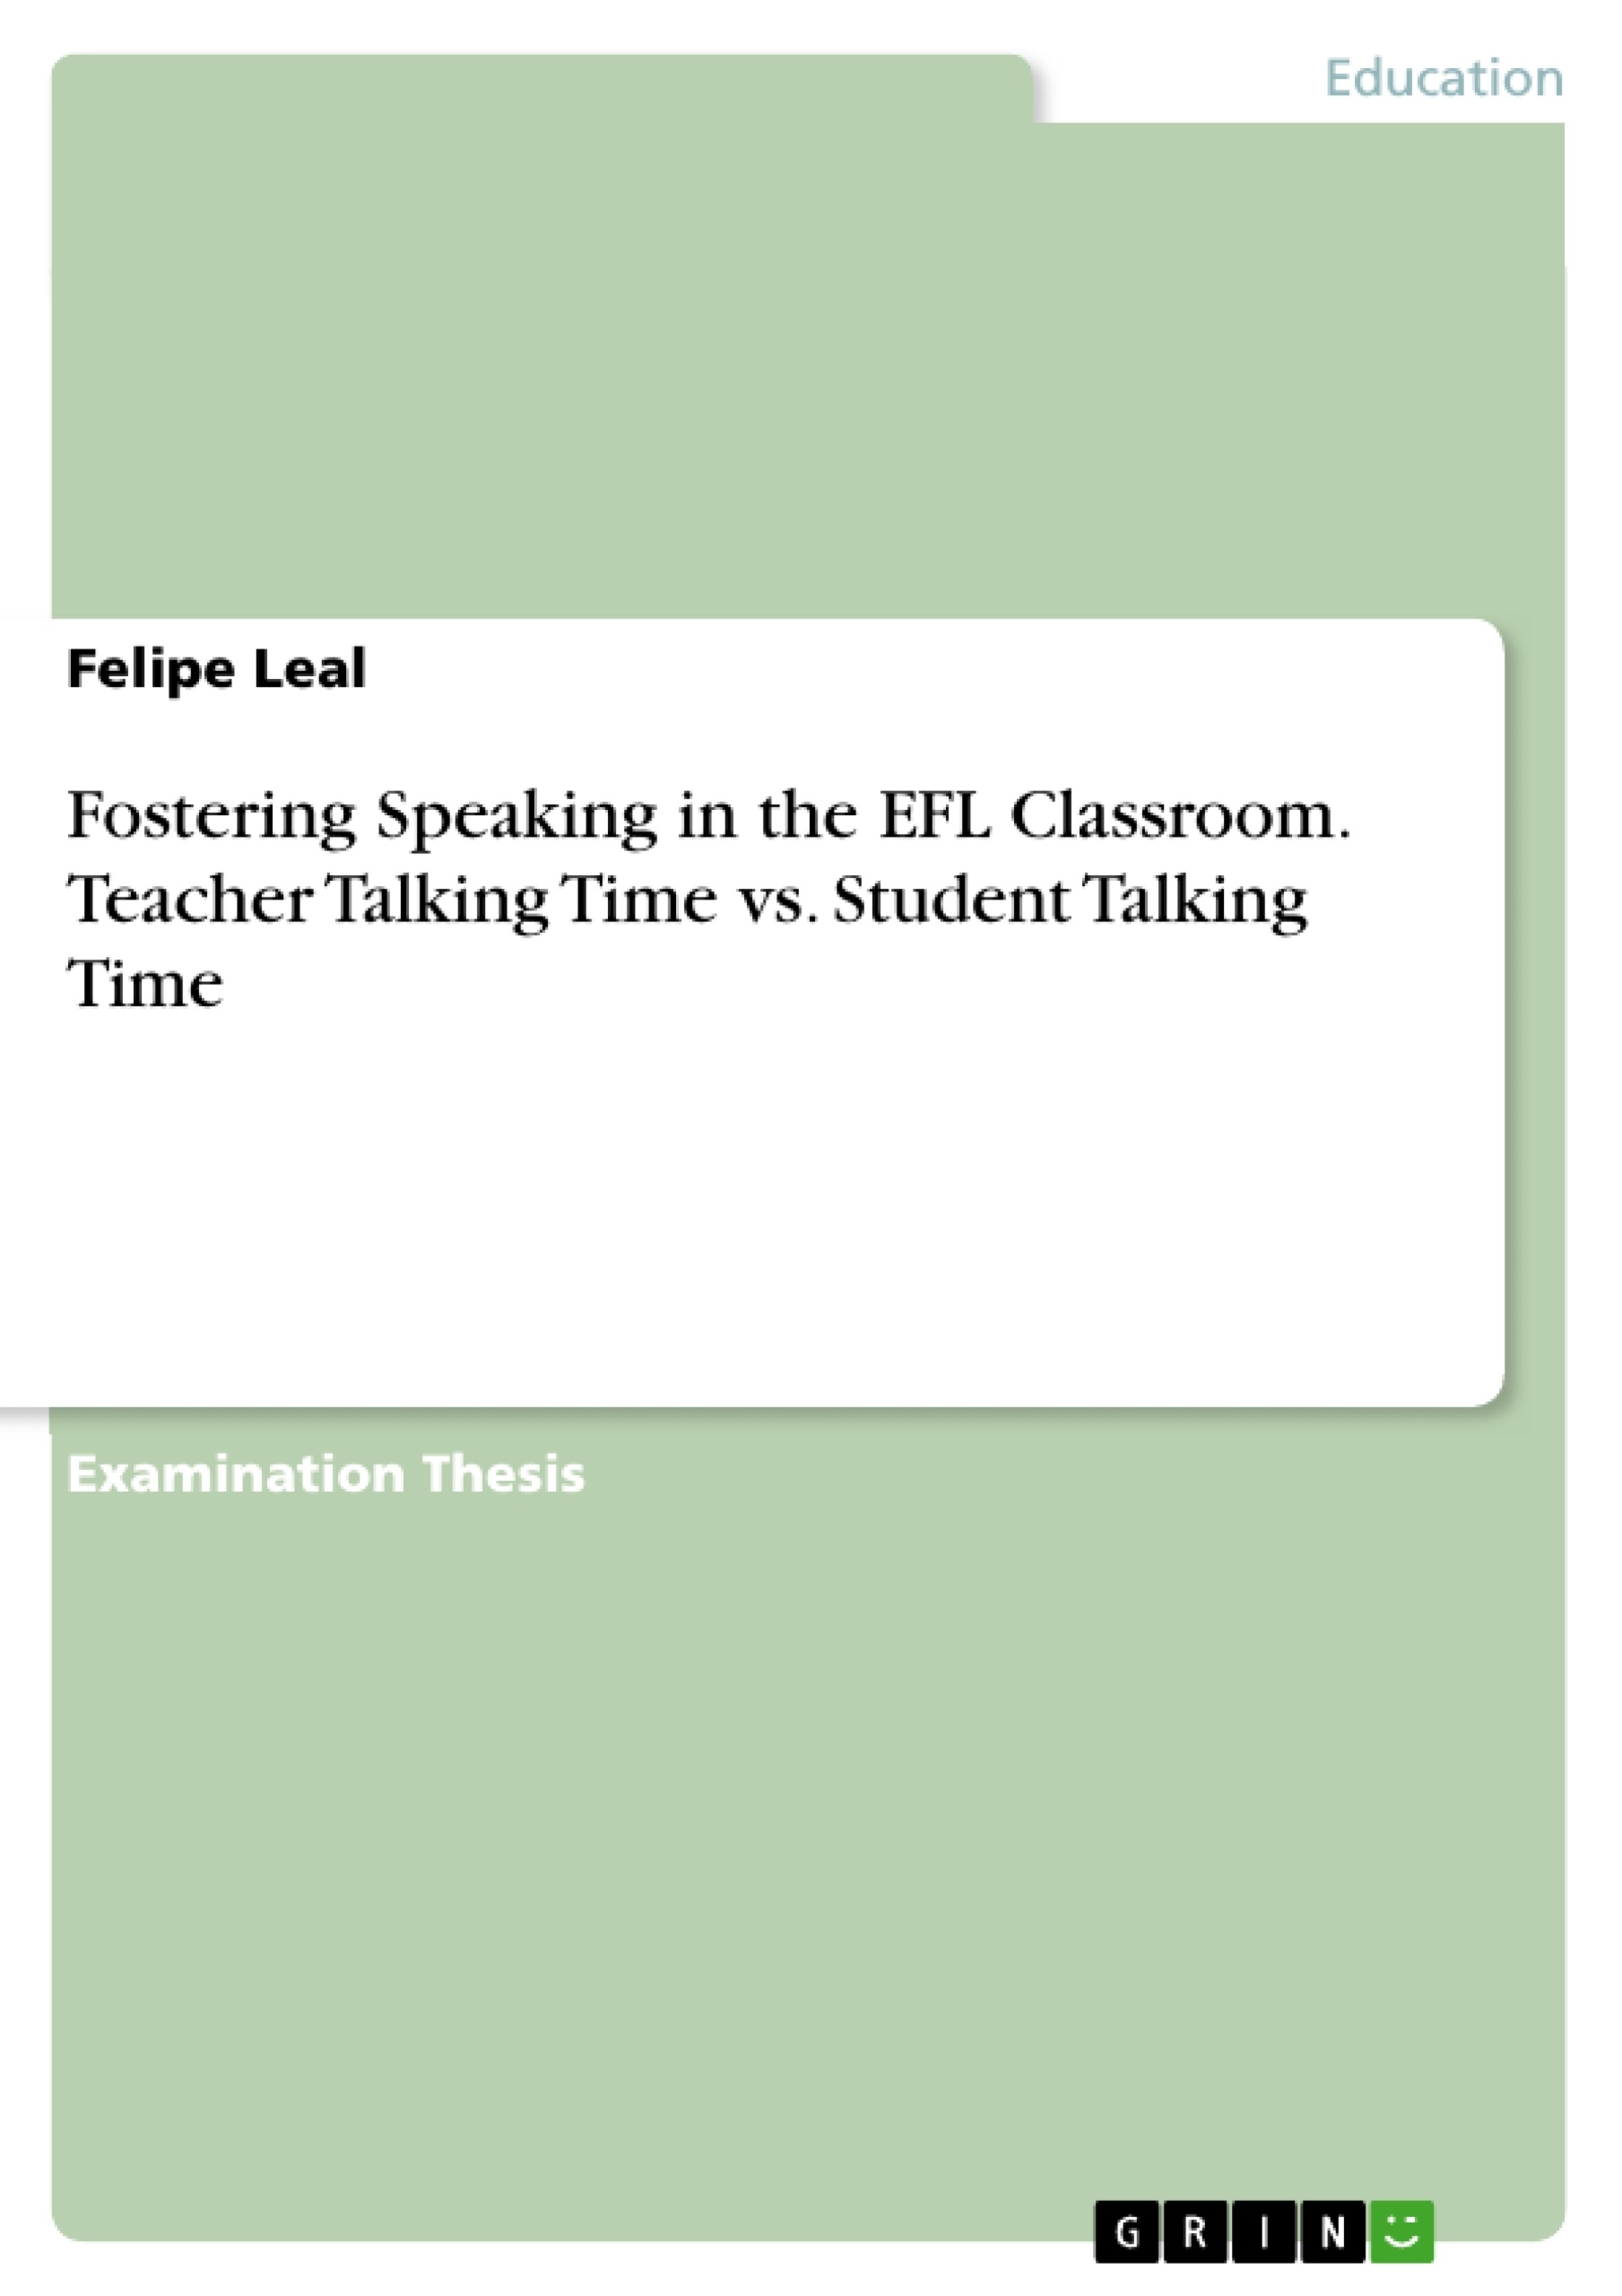 Title: Fostering Speaking in the EFL Classroom. Teacher Talking Time vs. Student Talking Time